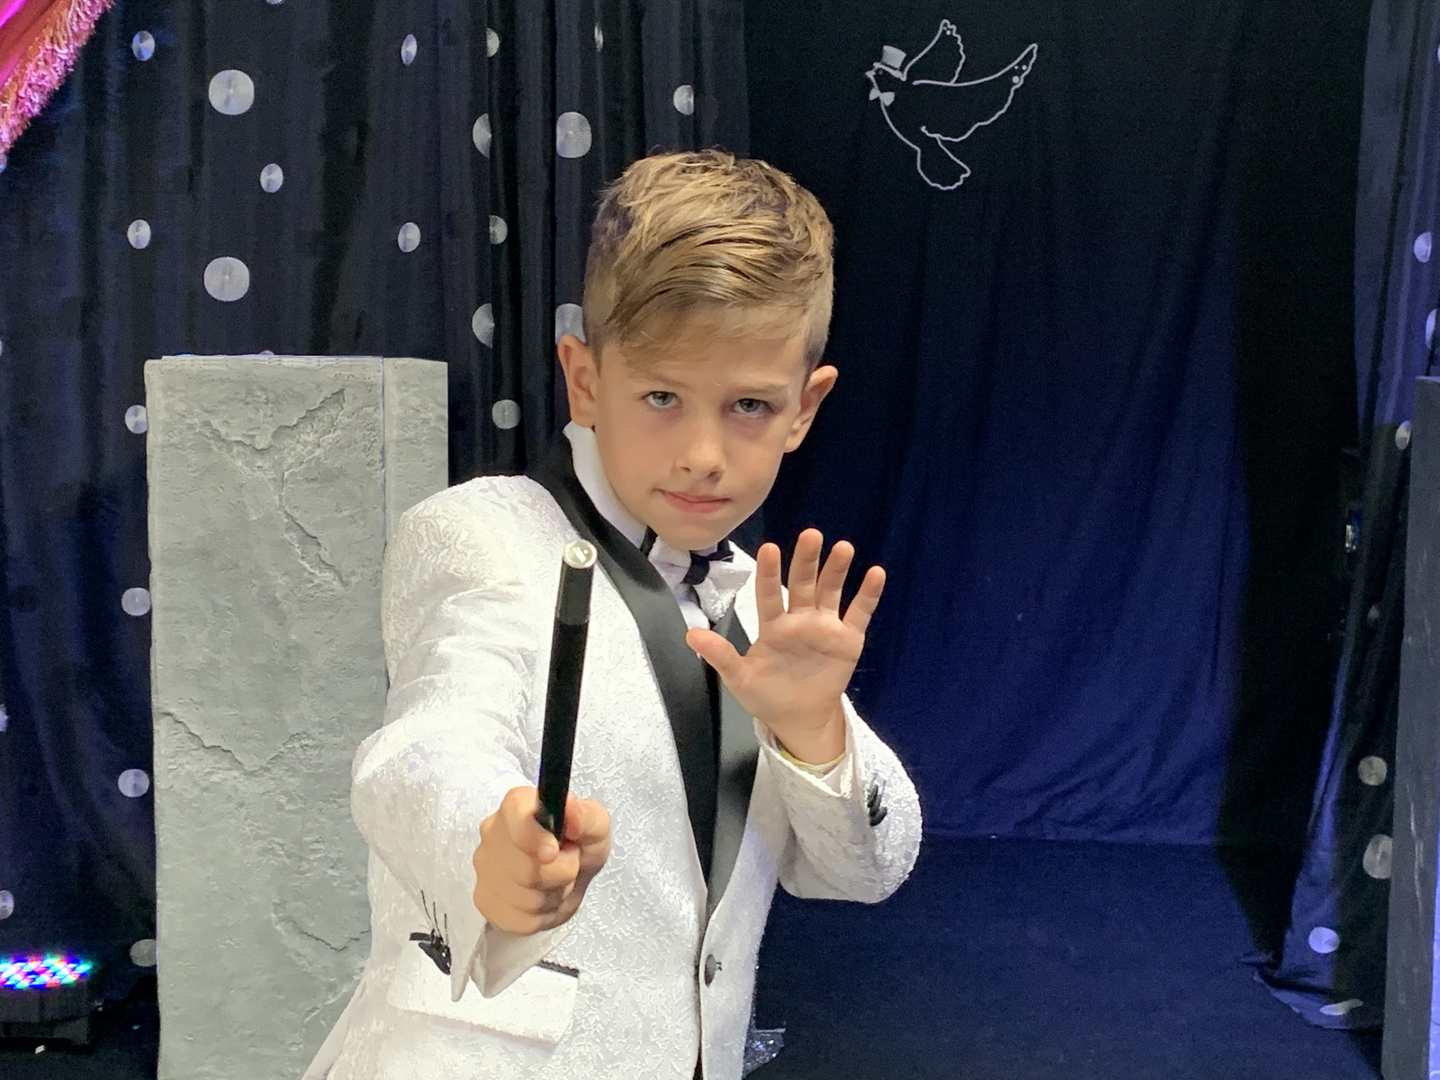 A young boy in a tuxedo holding a magic wand.